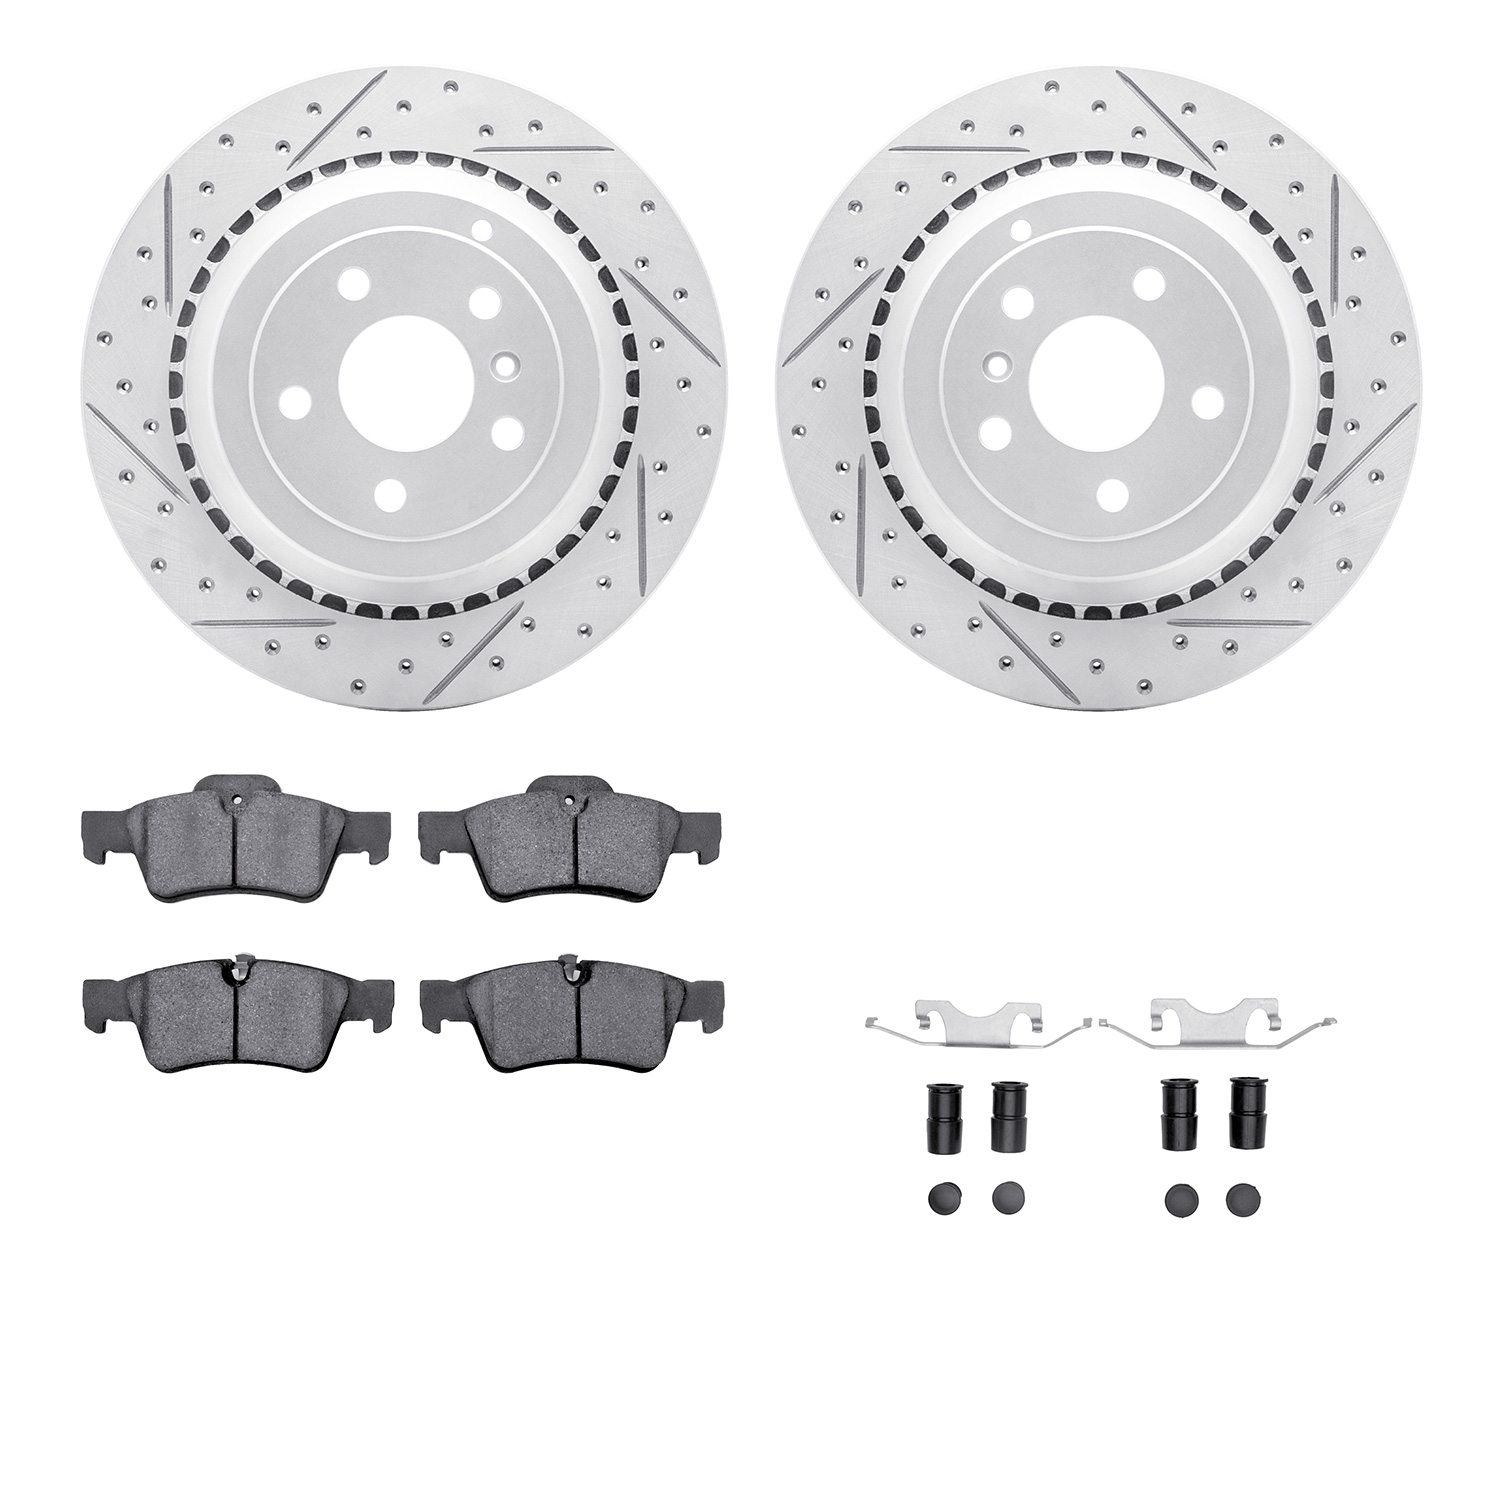 2512-63107 Geoperformance Drilled/Slotted Rotors w/5000 Advanced Brake Pads Kit & Hardware, 2006-2012 Mercedes-Benz, Position: R